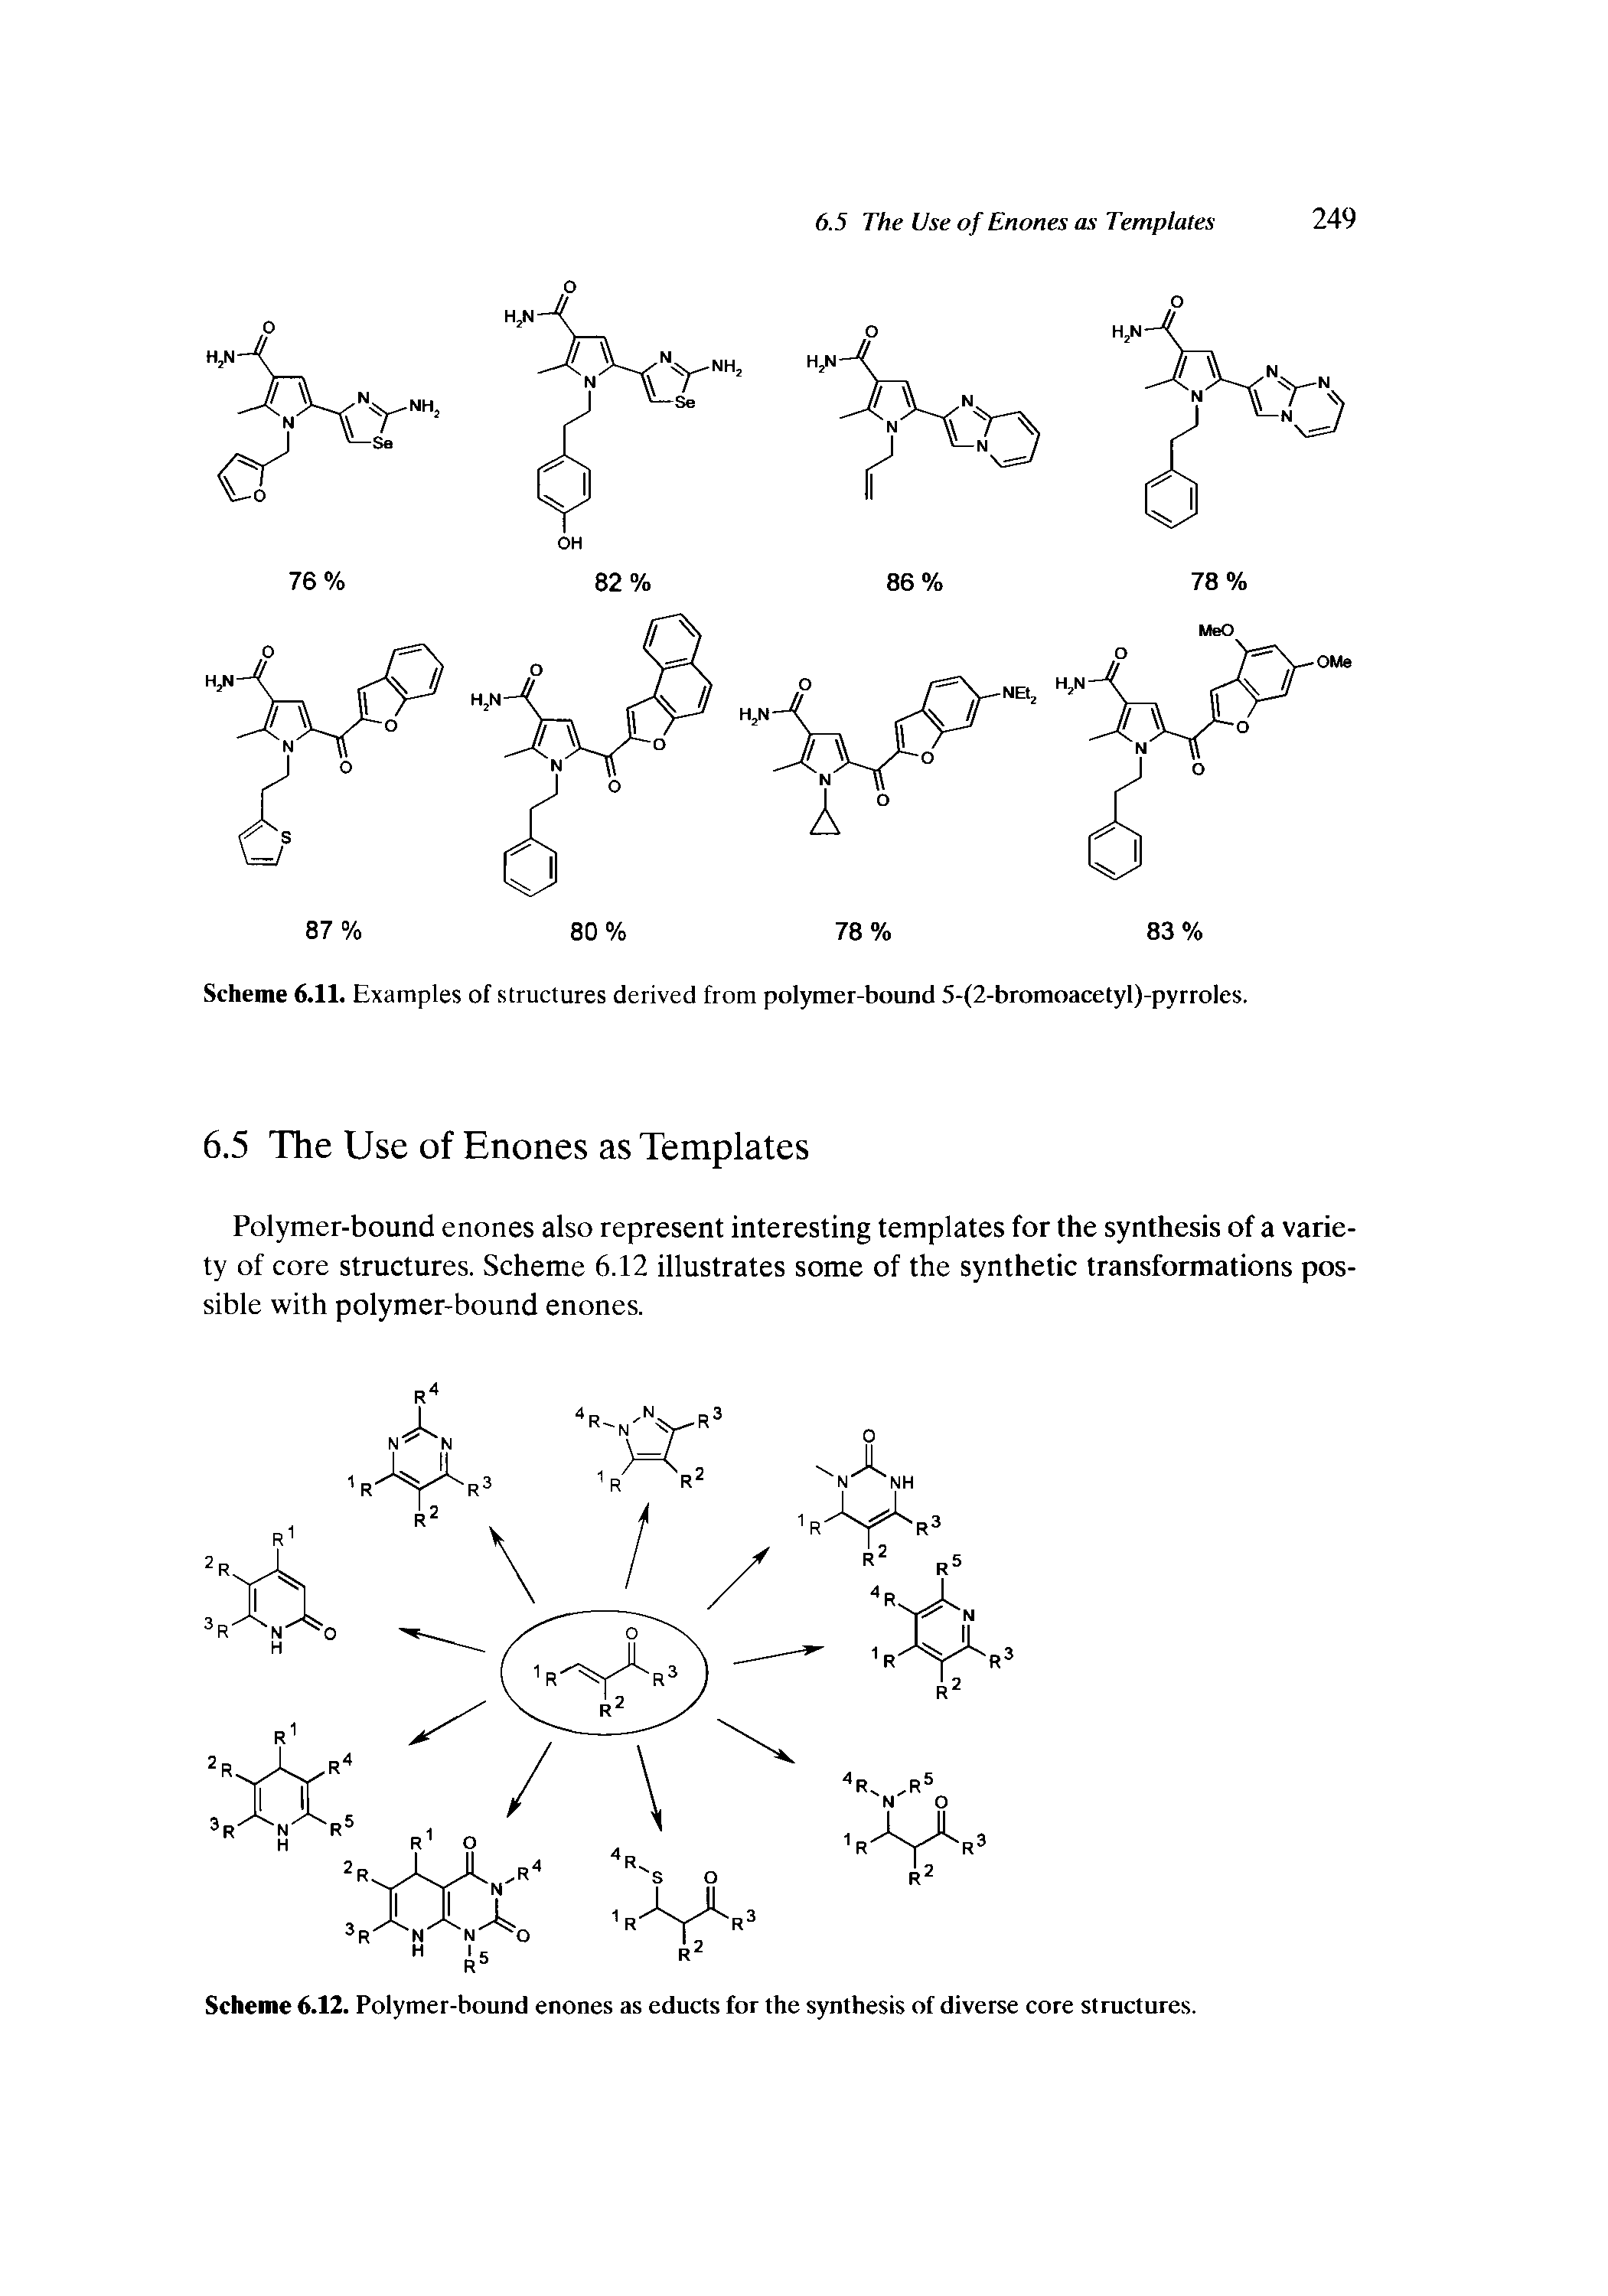 Scheme 6.12. Polymer-bound enones as educts for the synthesis of diverse core structures.